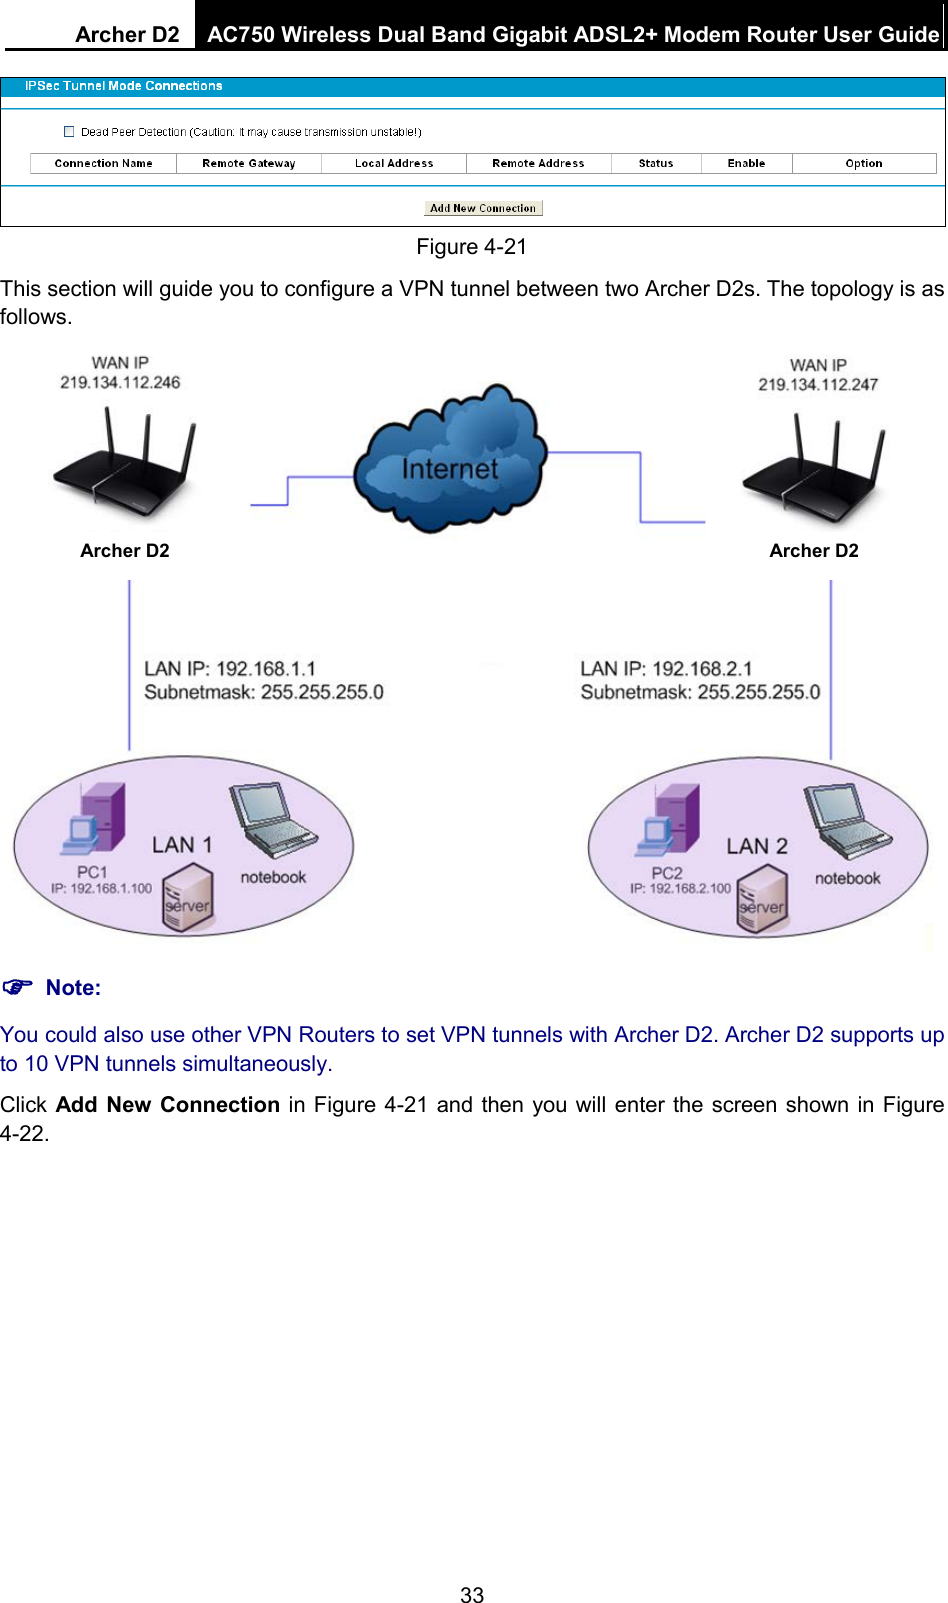 Archer D2 AC750 Wireless Dual Band Gigabit ADSL2+ Modem Router User Guide   Figure 4-21 This section will guide you to configure a VPN tunnel between two Archer D2s. The topology is as follows.   Note: You could also use other VPN Routers to set VPN tunnels with Archer D2. Archer D2 supports up to 10 VPN tunnels simultaneously. Click Add New Connection in Figure 4-21 and then you will enter the screen shown in Figure 4-22. Archer D2 Archer D2 33 